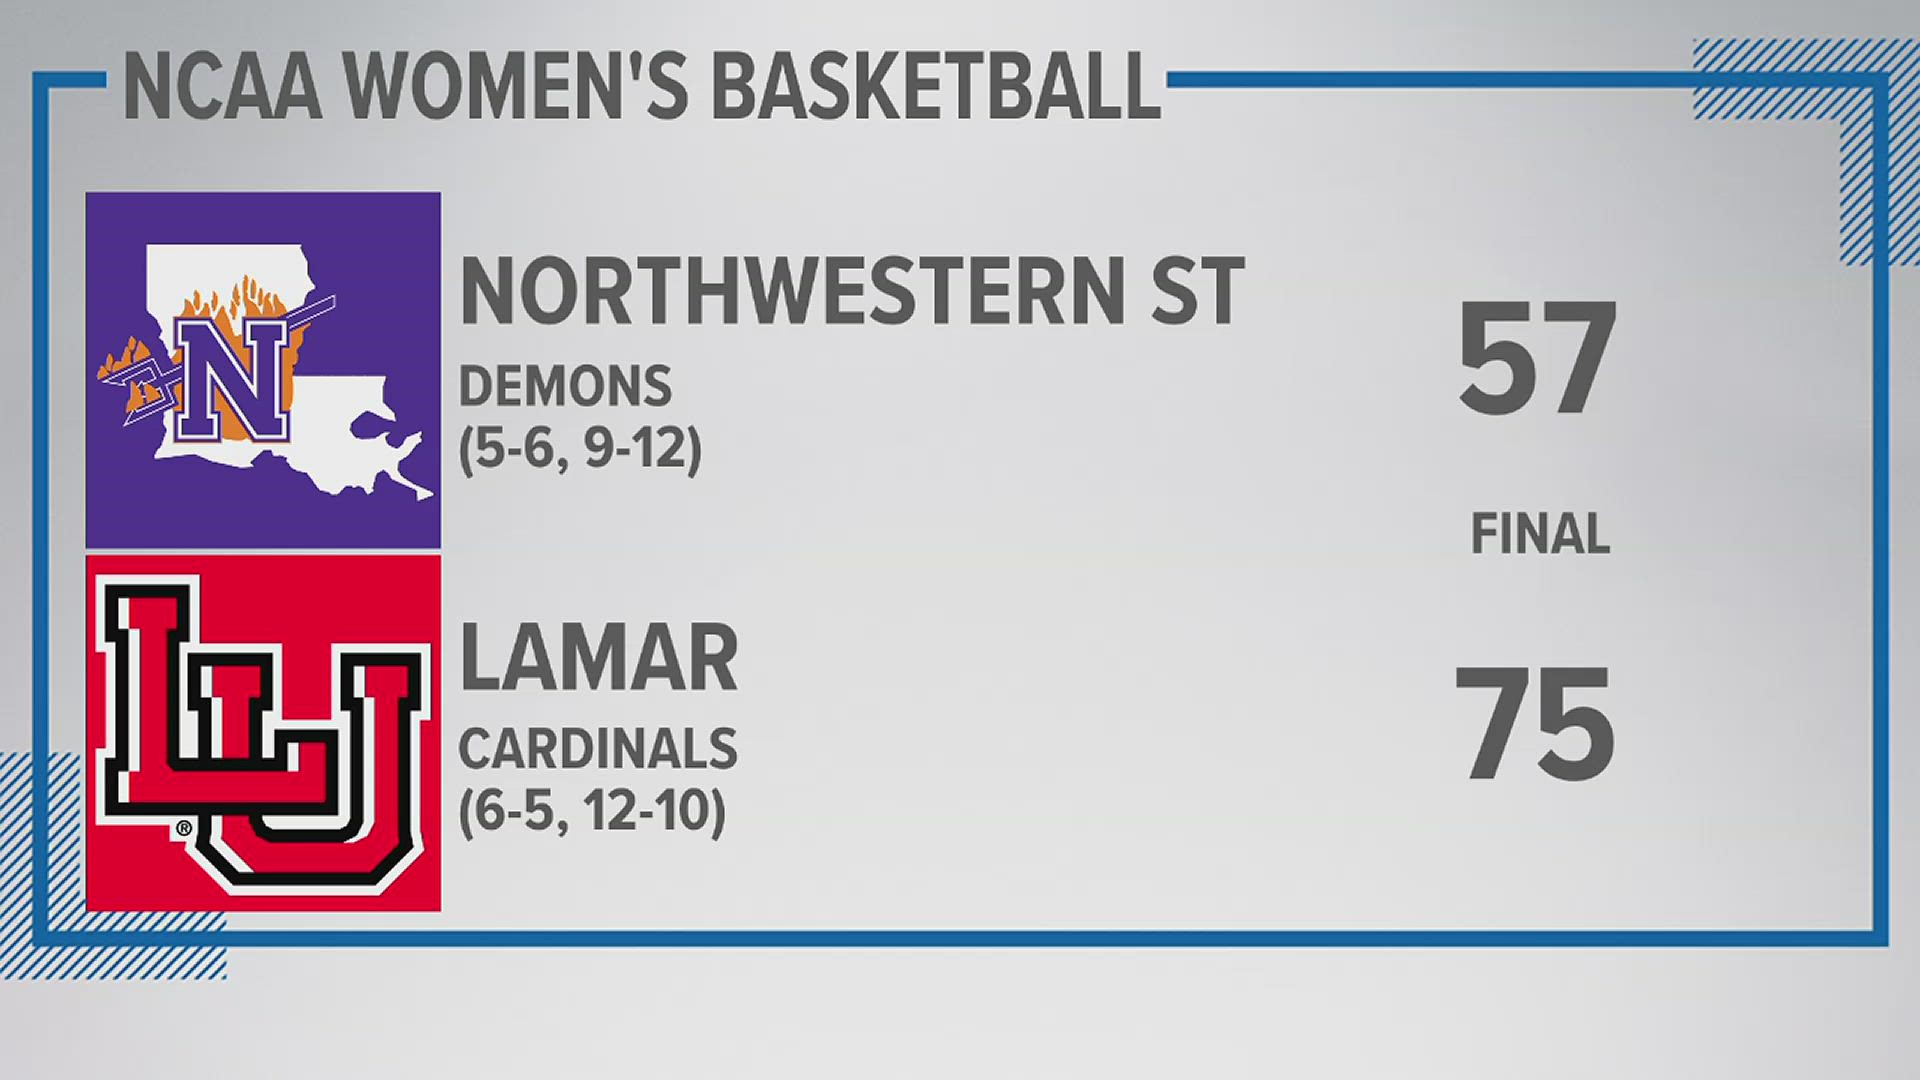 Lamar University is now currently 12-10 overall and 6-5 in the Southland Conference.